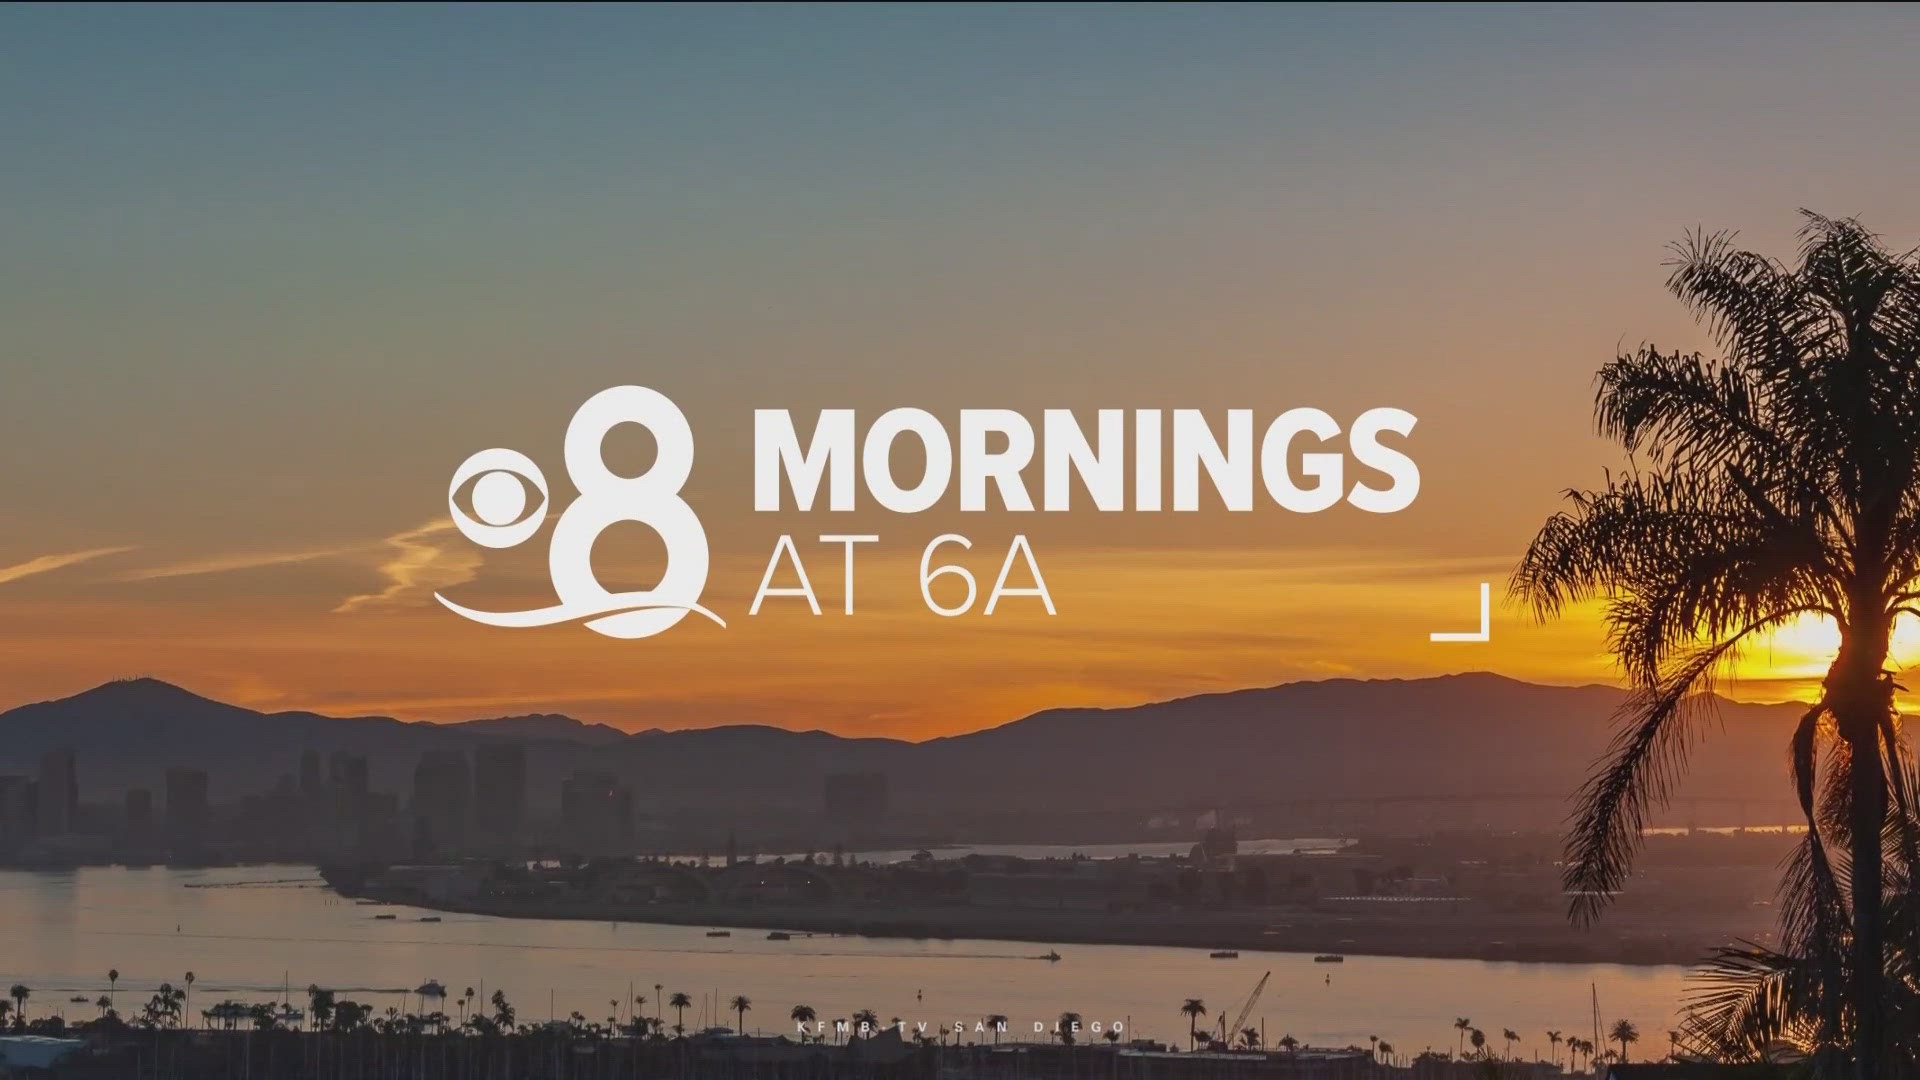 Here are the top stories around San Diego County for the morning of Monday, May 13th.
For the latest news, weather and sports, head to:
https://www.cbs8.com/